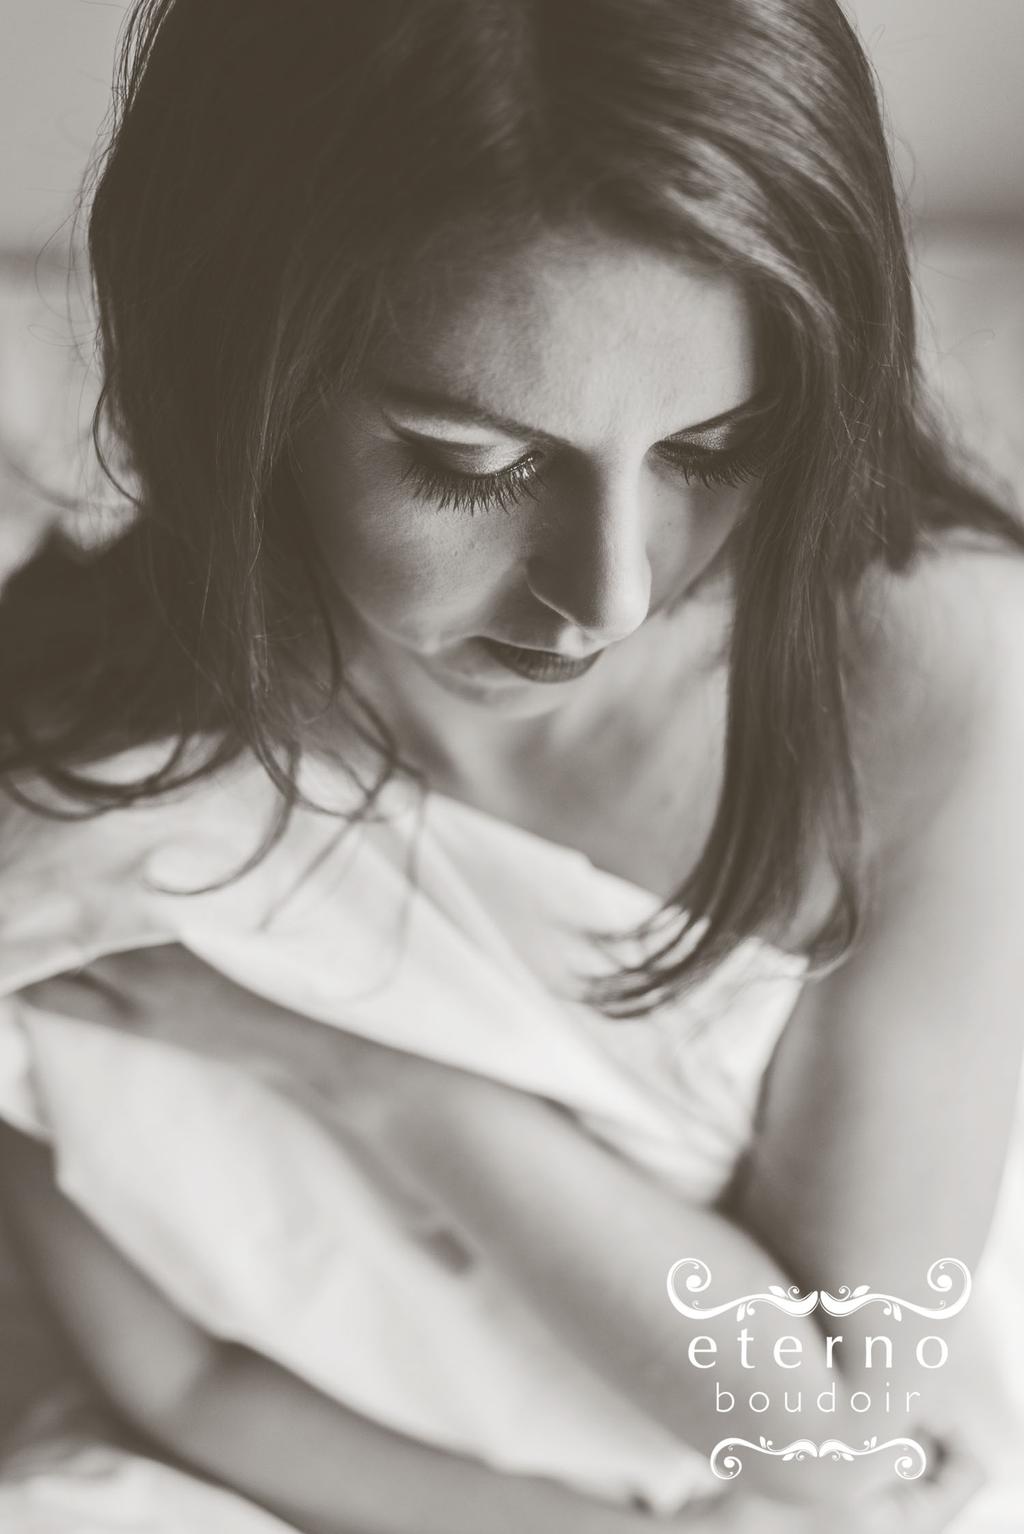 ABOUT Boudoir is the most beautiful and currently the 'must have' genre in ladies portrait photography. Indulge yourself and boost your self-esteem with one of our Eterno Boudoir shoots.